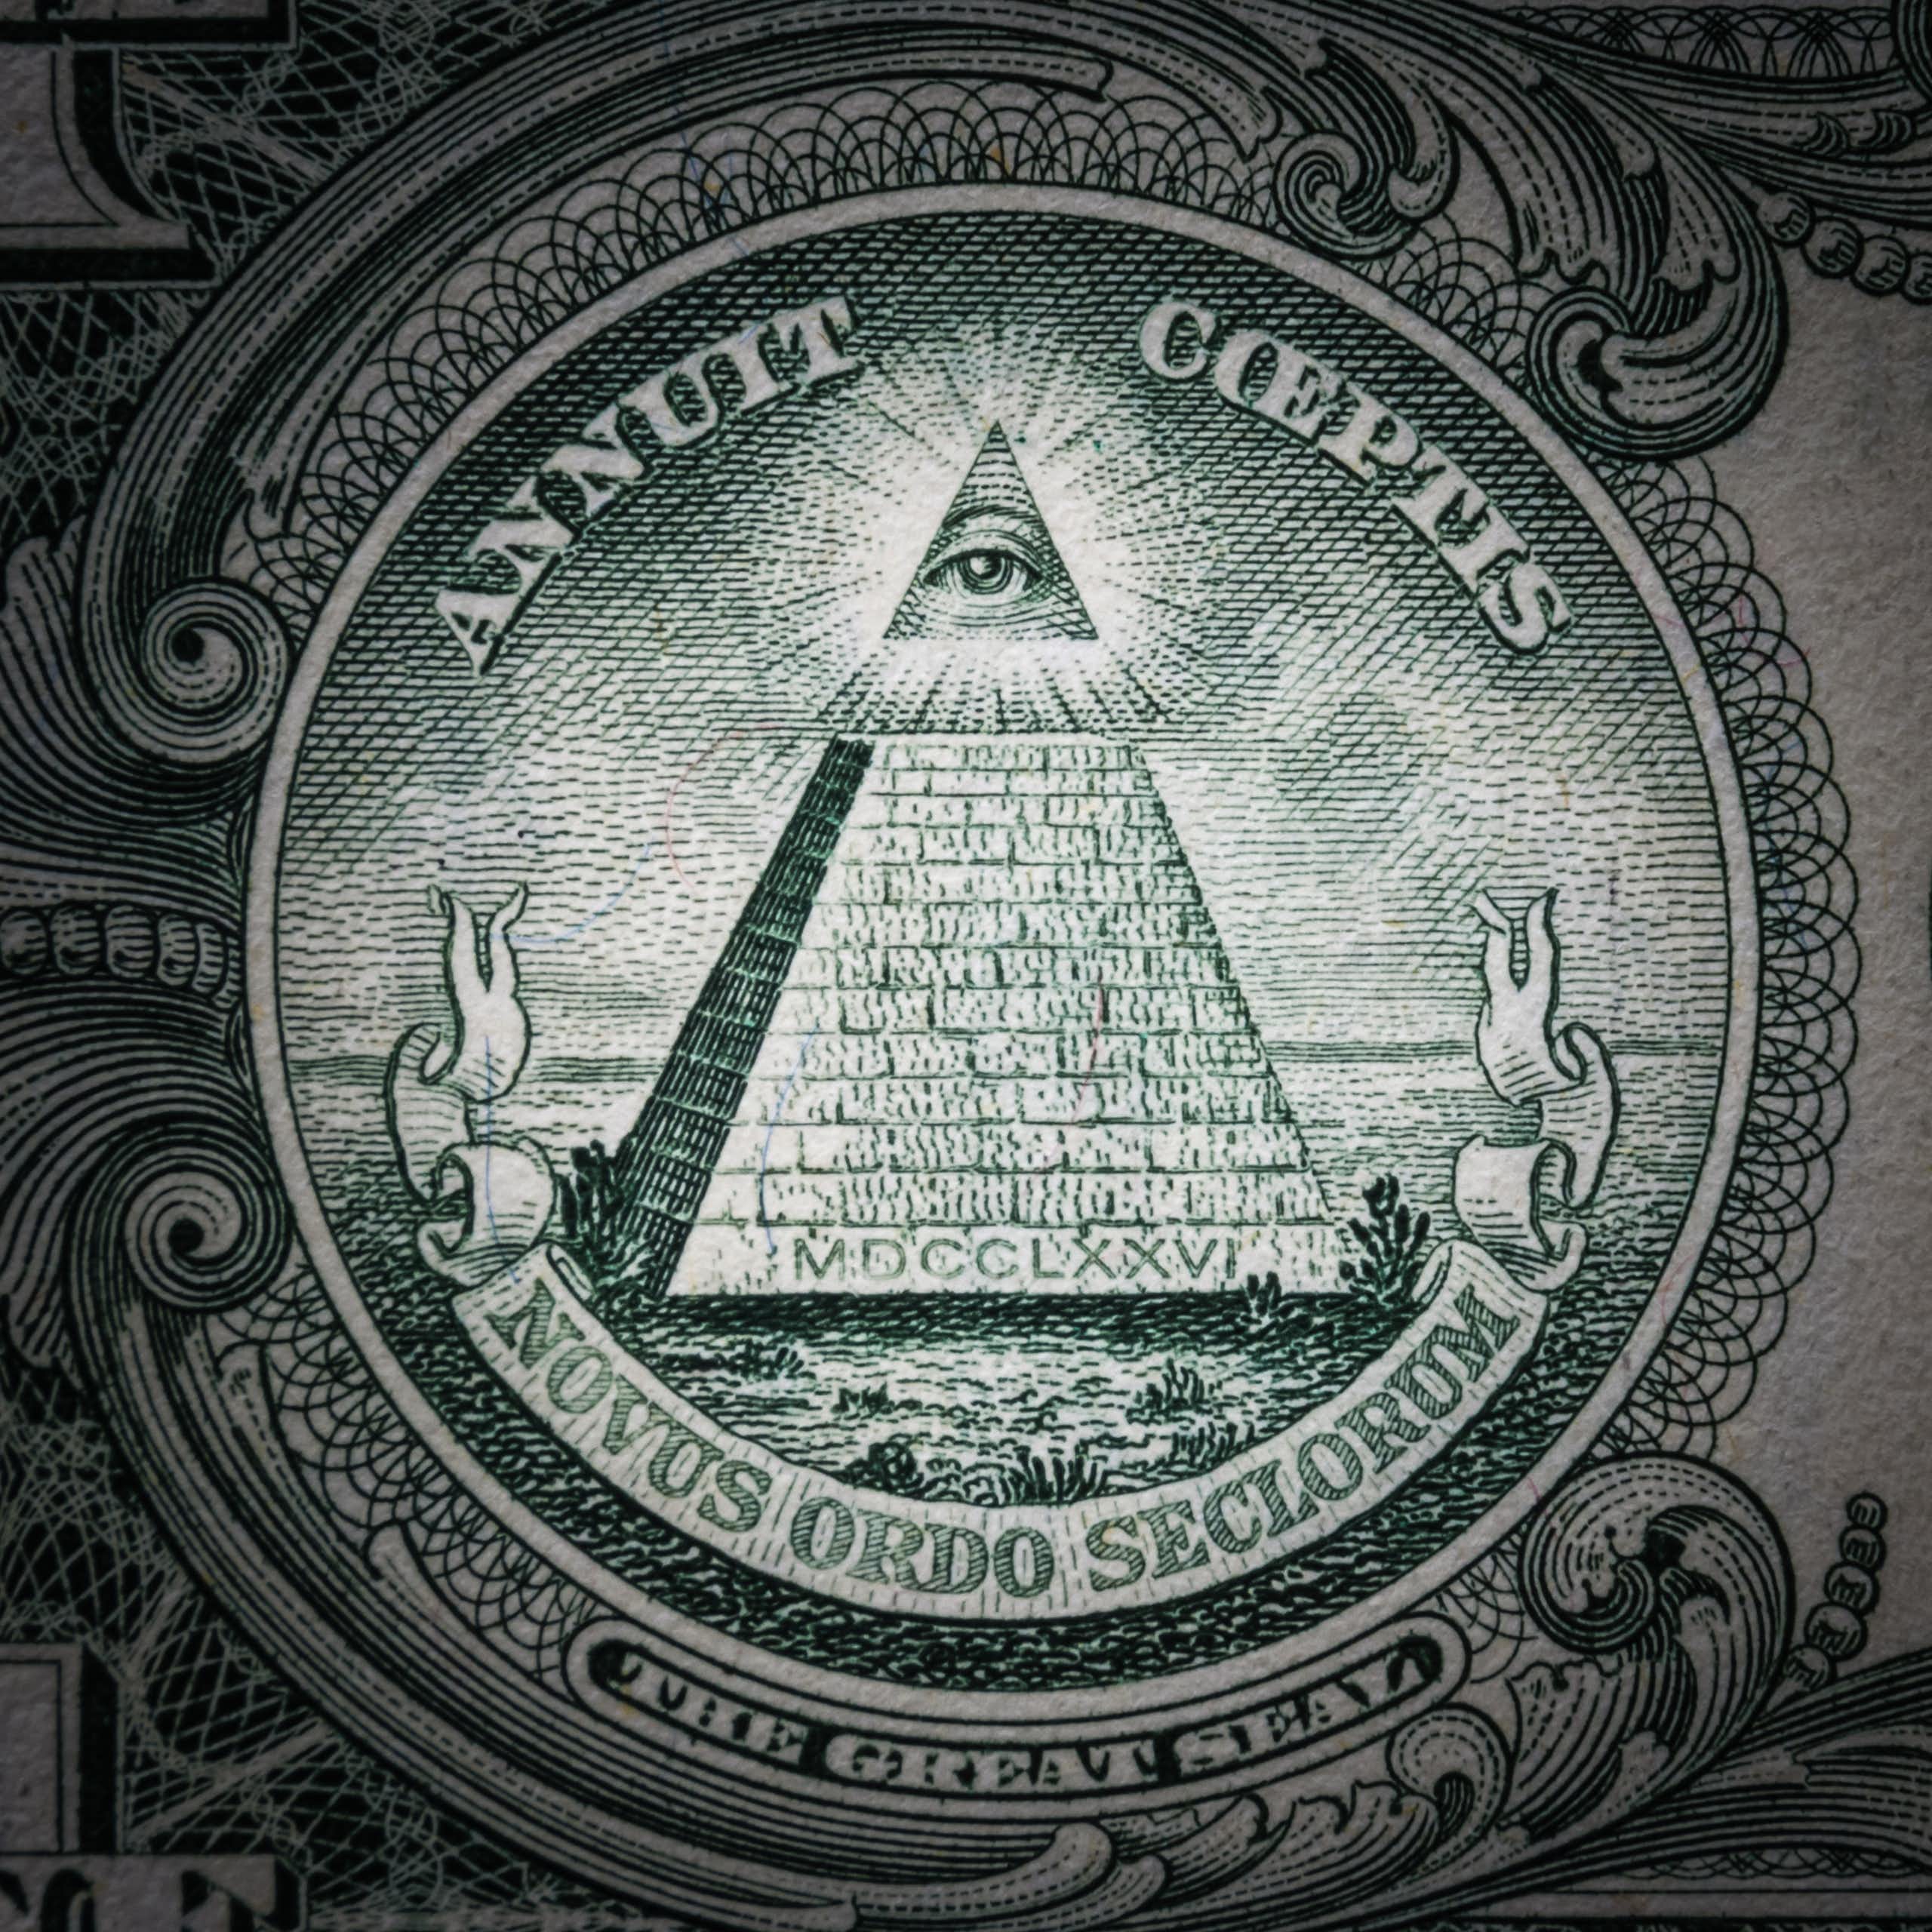 A short history of conspiracy theories – listen to part three of our expert guide